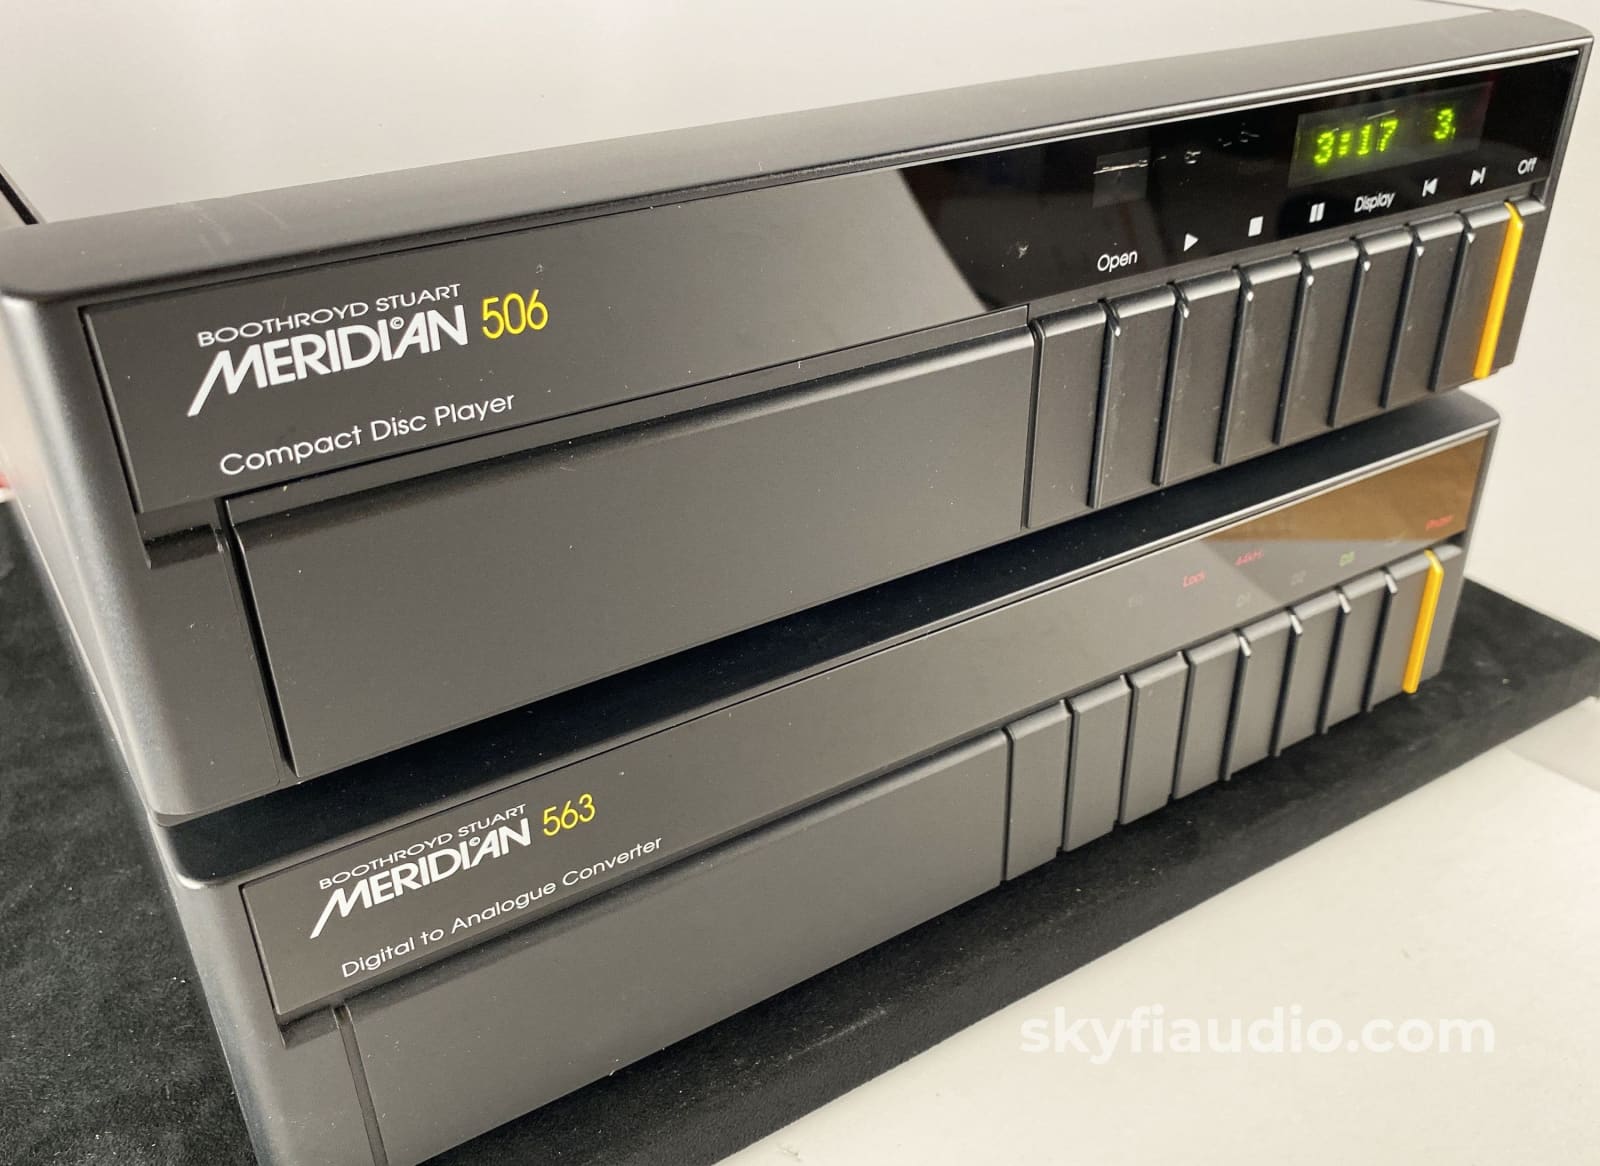 Meridian 500 Series - 506 Cd Transport With 563 Dac And Msr+ Remote + Digital